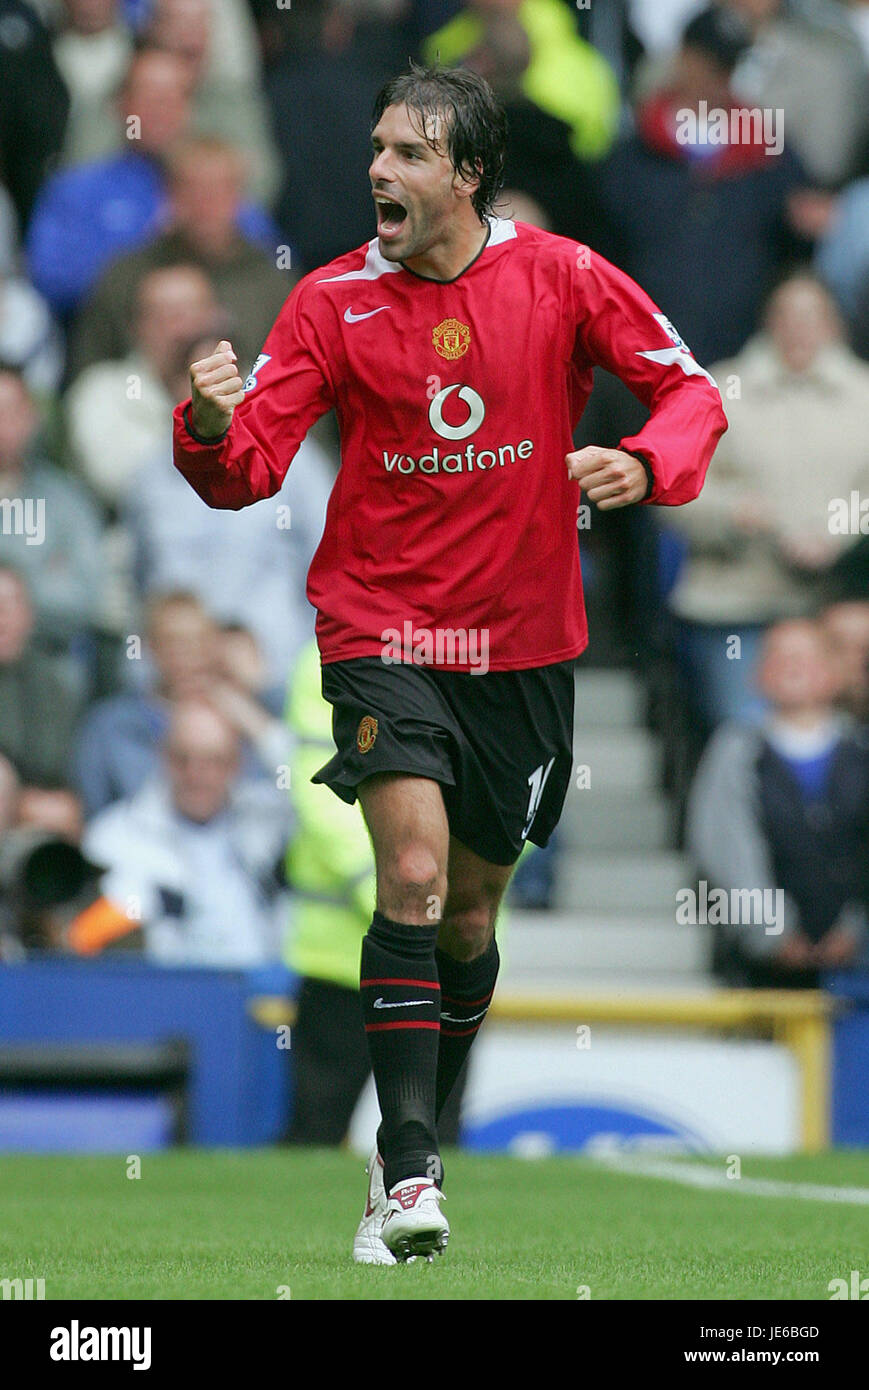 RUUD VAN NISTELROOY MANCHESTER UNITED FC GOODISON PARK LIVERPOOL ENGLAND 13 August 2005 Stock Photo